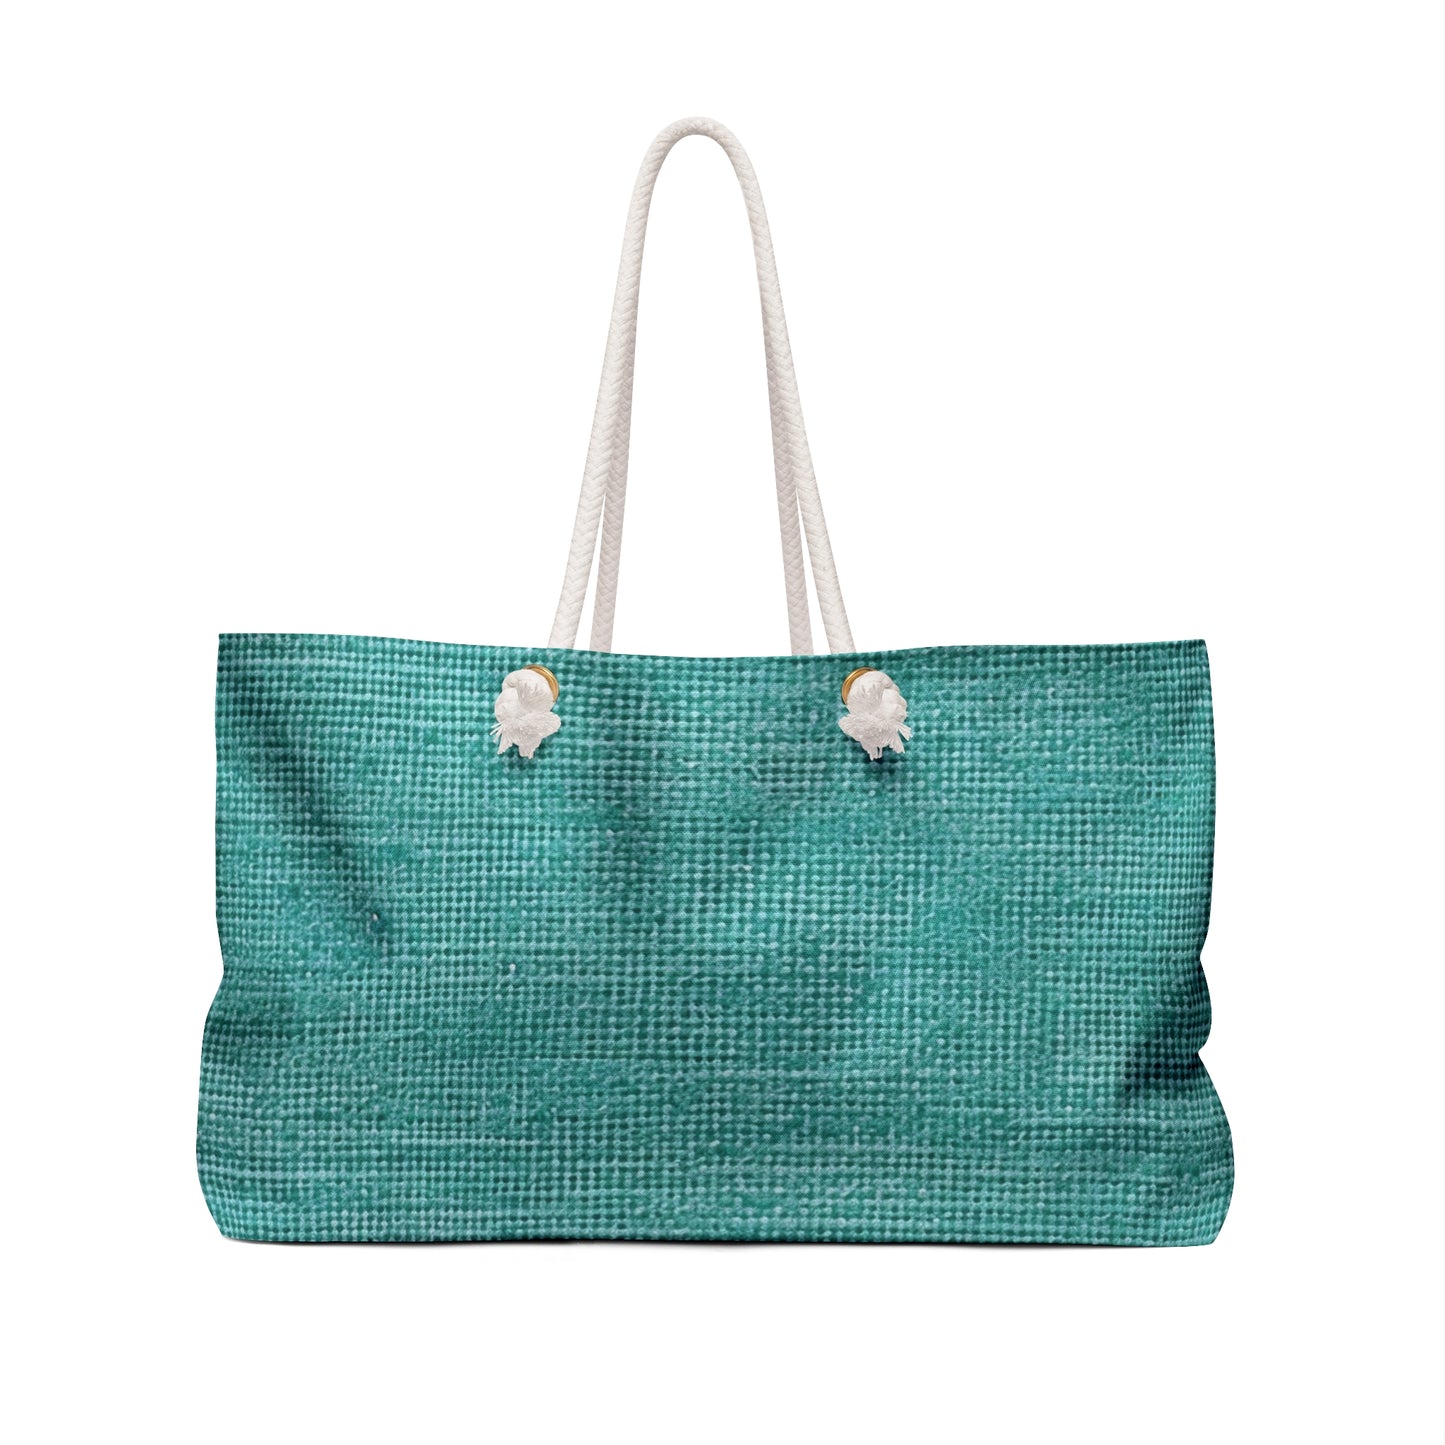 Quality Mint Turquoise Denim Fabric Deisgn, Stylish Material - Weekender Bag